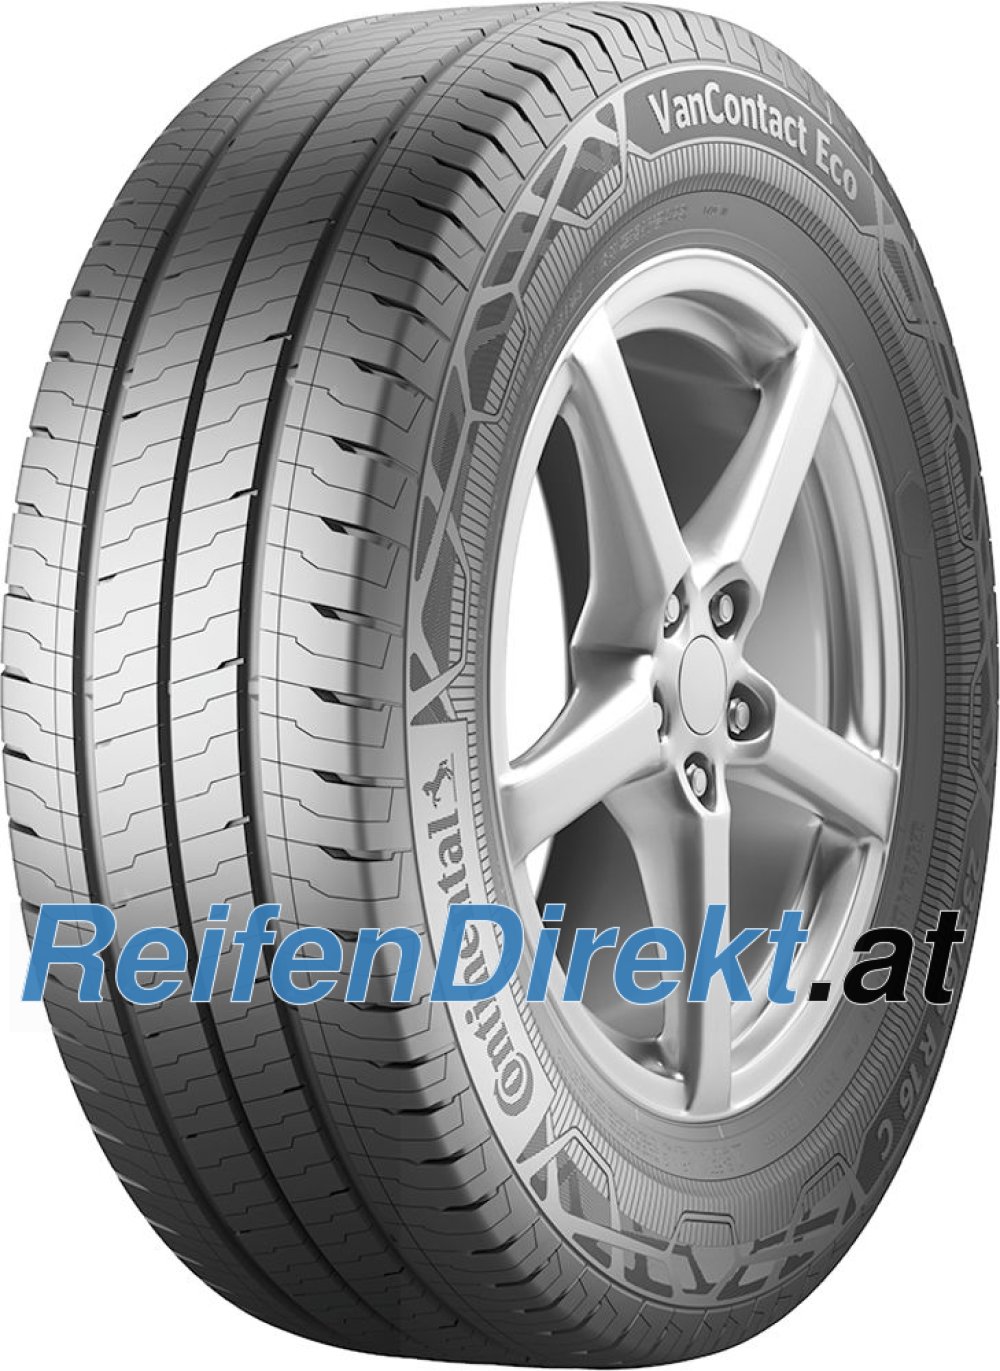 Continental VanContact Eco 205/65 R16C 107/105T 8PR Doppelkennung 103T